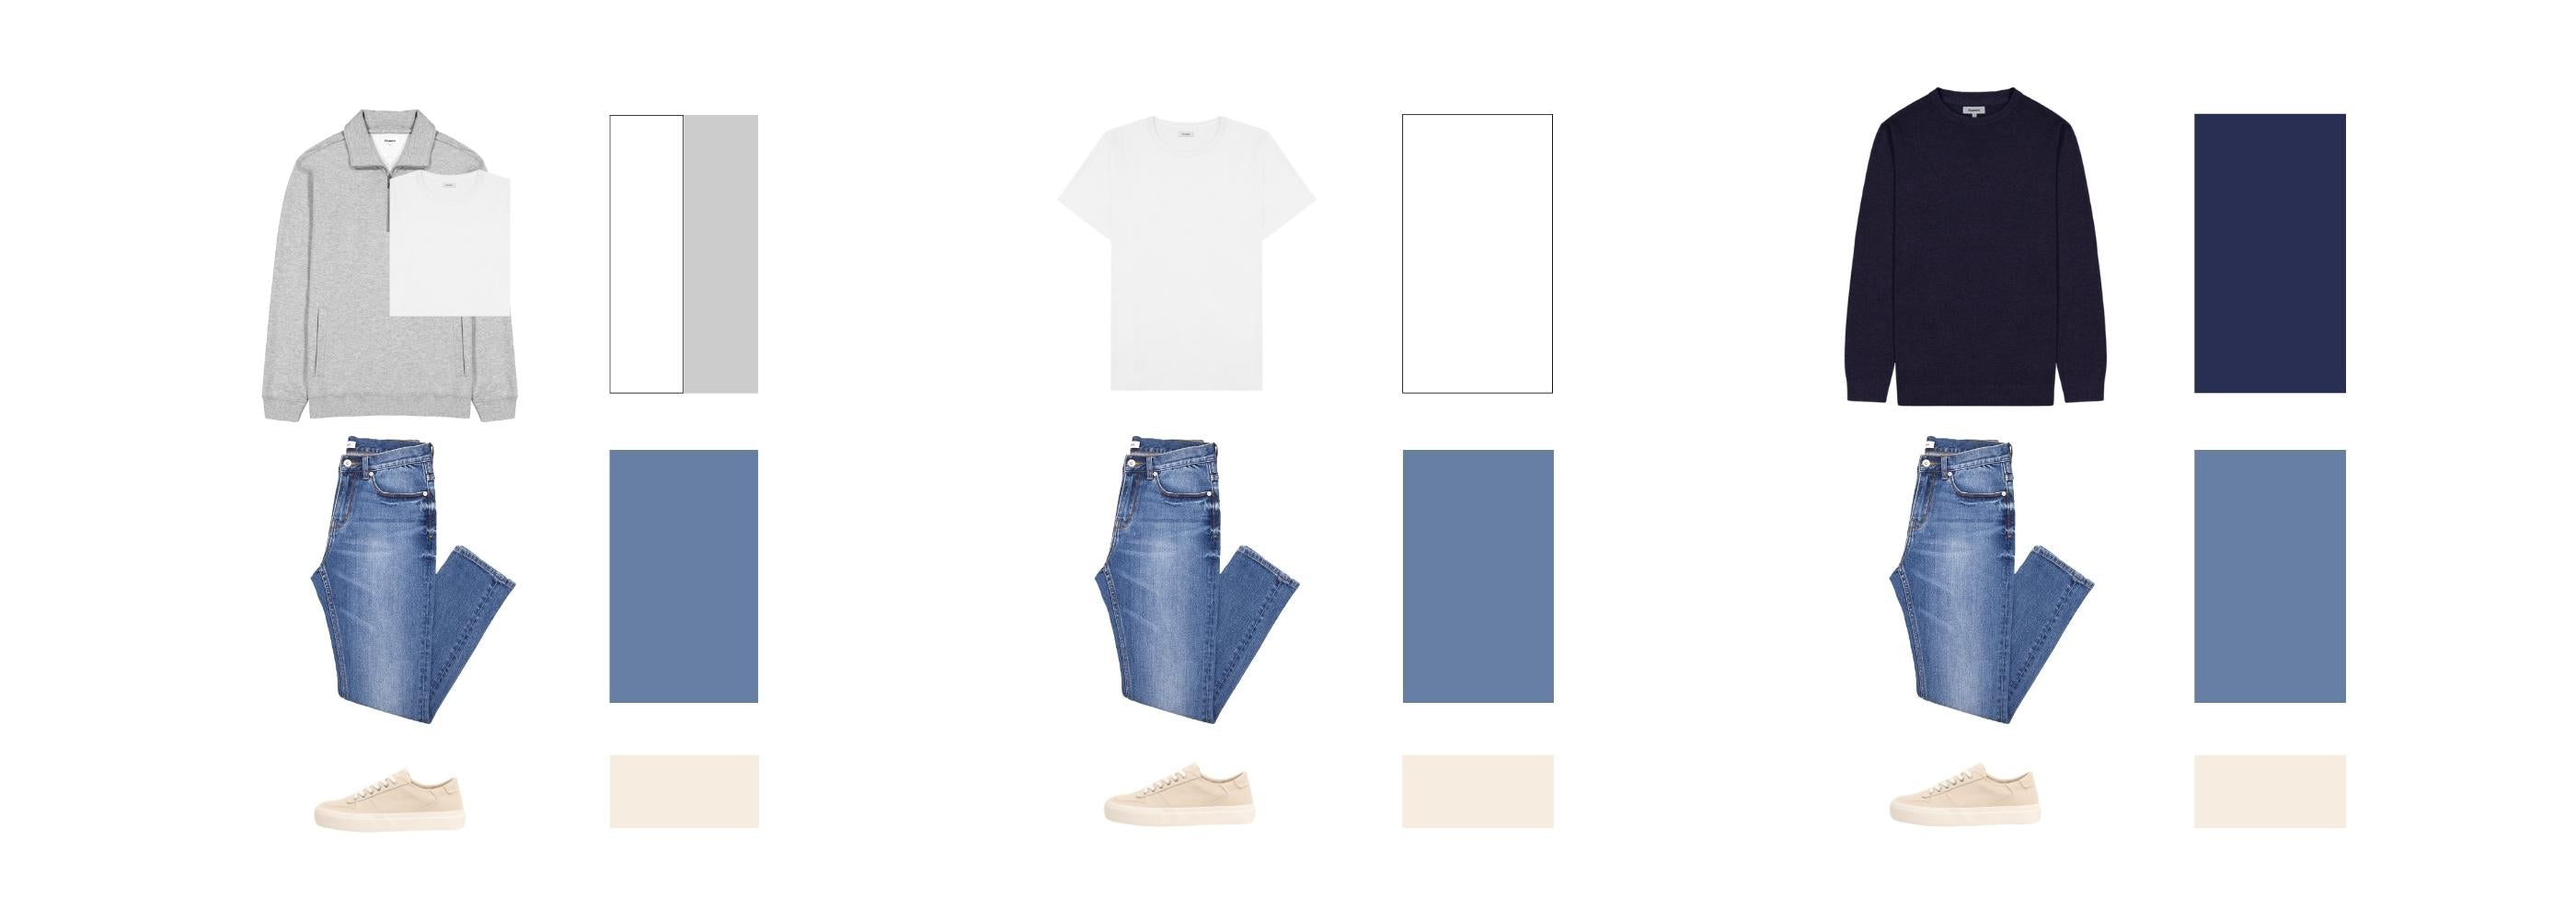 Foolproof Colour Combinations for Washed Blue Jeans with a White/Cream Sneaker